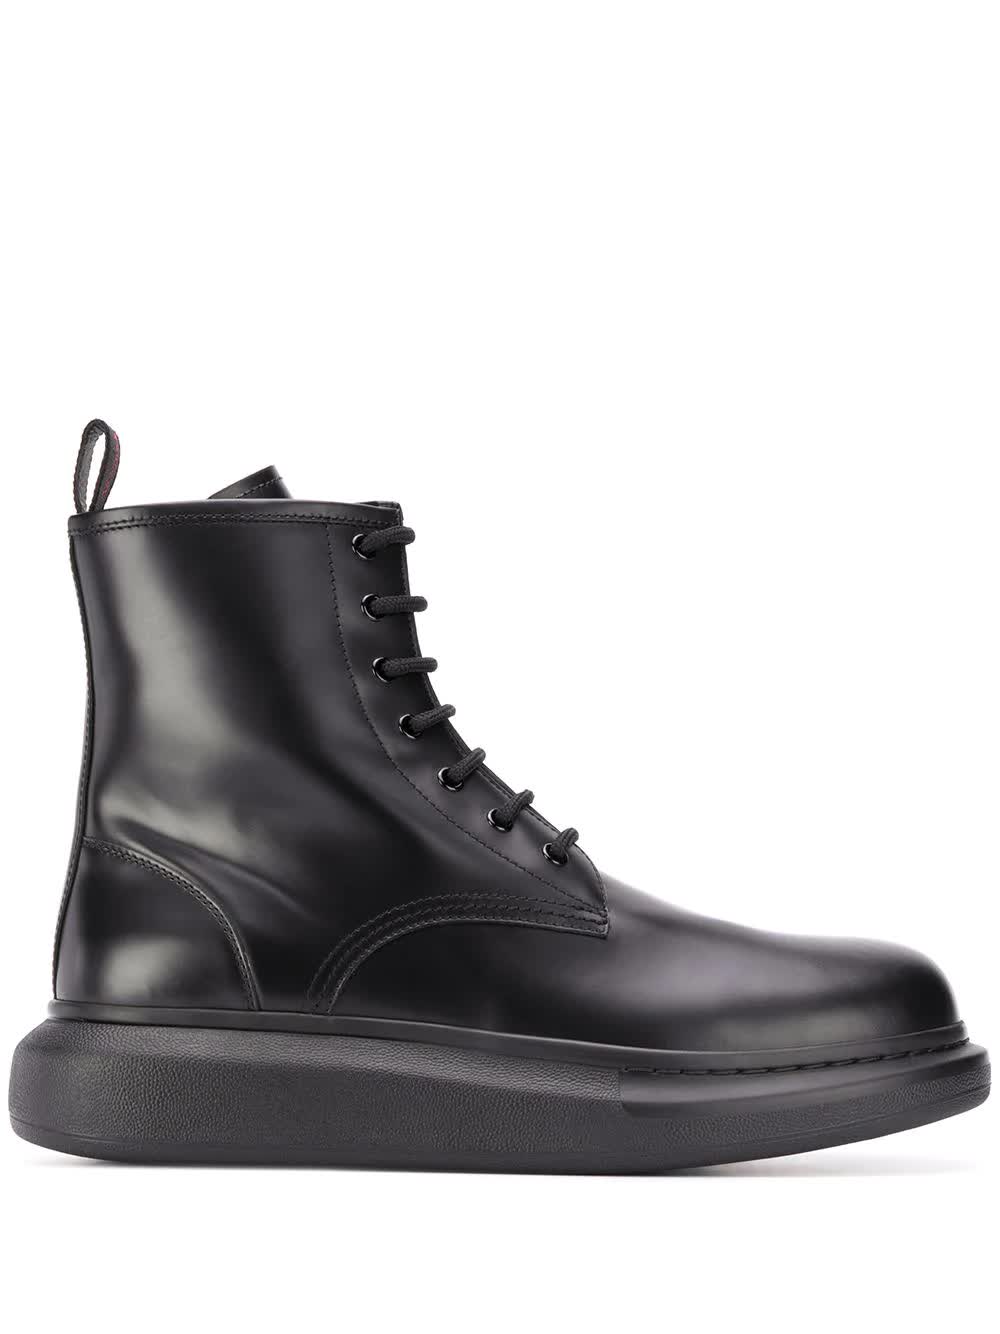 ALEXANDER MCQUEEN MAN OVERSIZE ANKLE BOOT IN BLACK LEATHER,586191-WHX51 1000